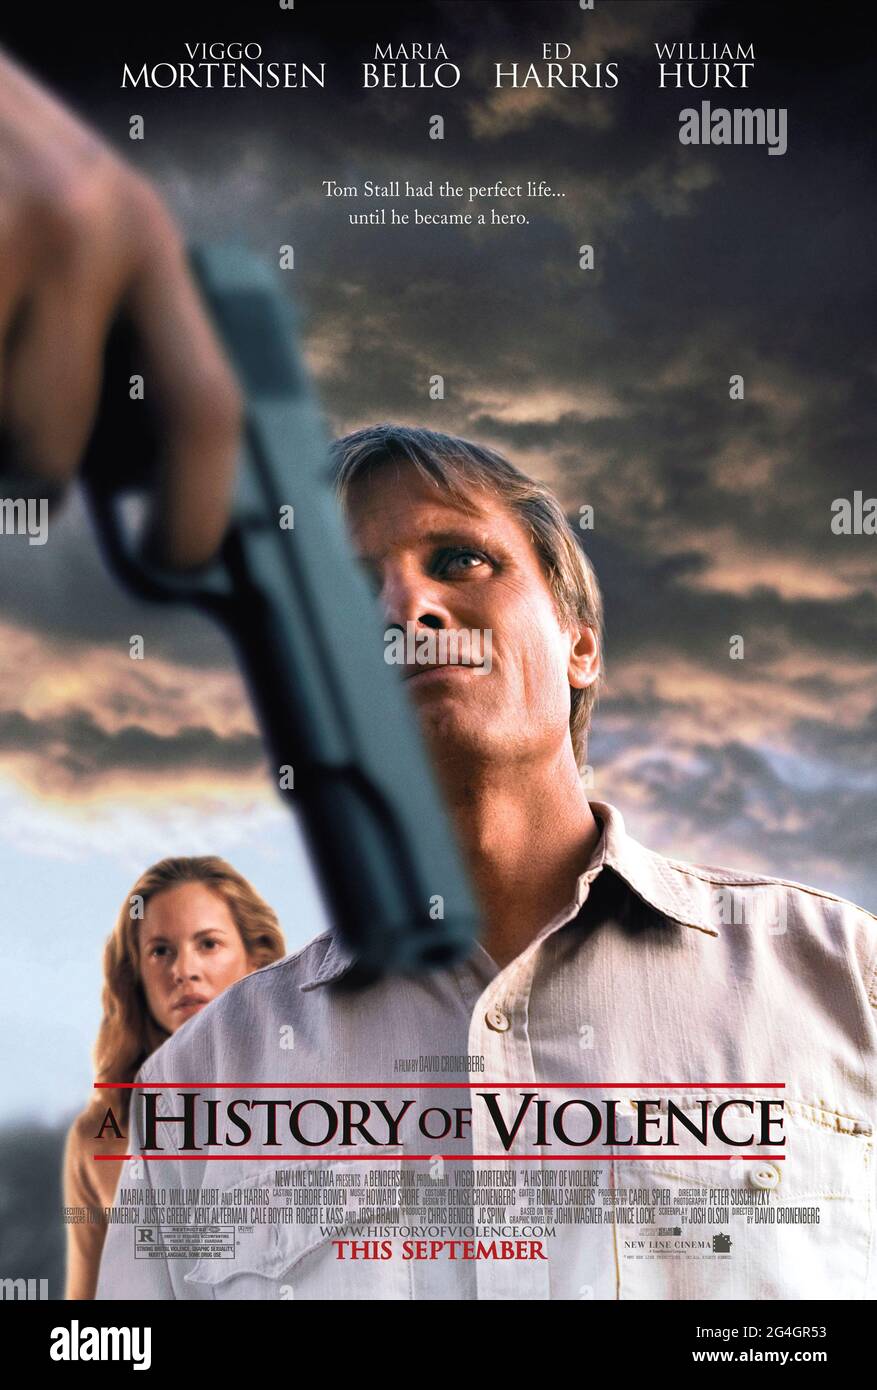 A History of Violence (2005) directed by David Cronenberg and starring Viggo Mortensen, Maria Bello and Ed Harris. Adaptation of John Wagner and Vince Locke's graphic novel about a family man who becomes a local hero and attracts unwanted attention. Stock Photo